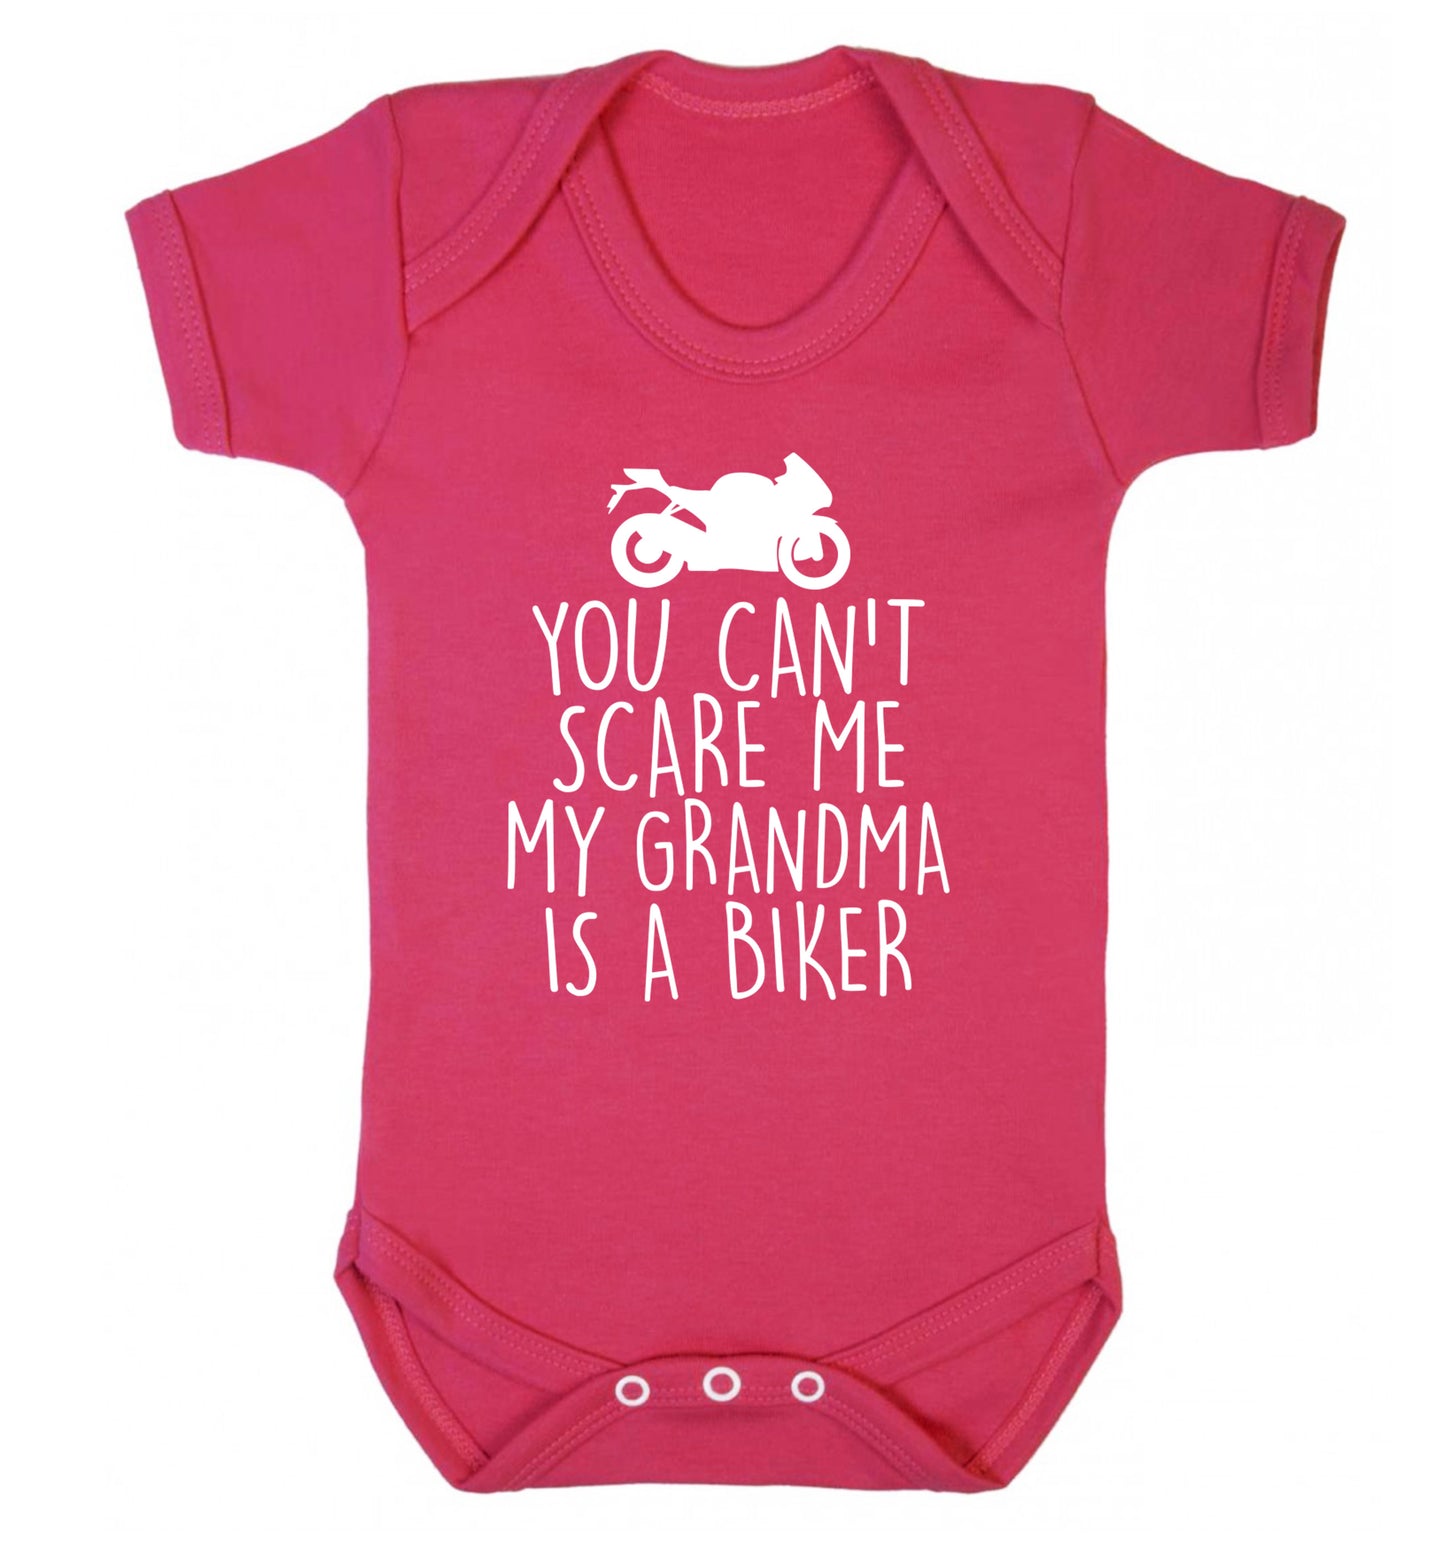 You can't scare me my grandma is a biker Baby Vest dark pink 18-24 months